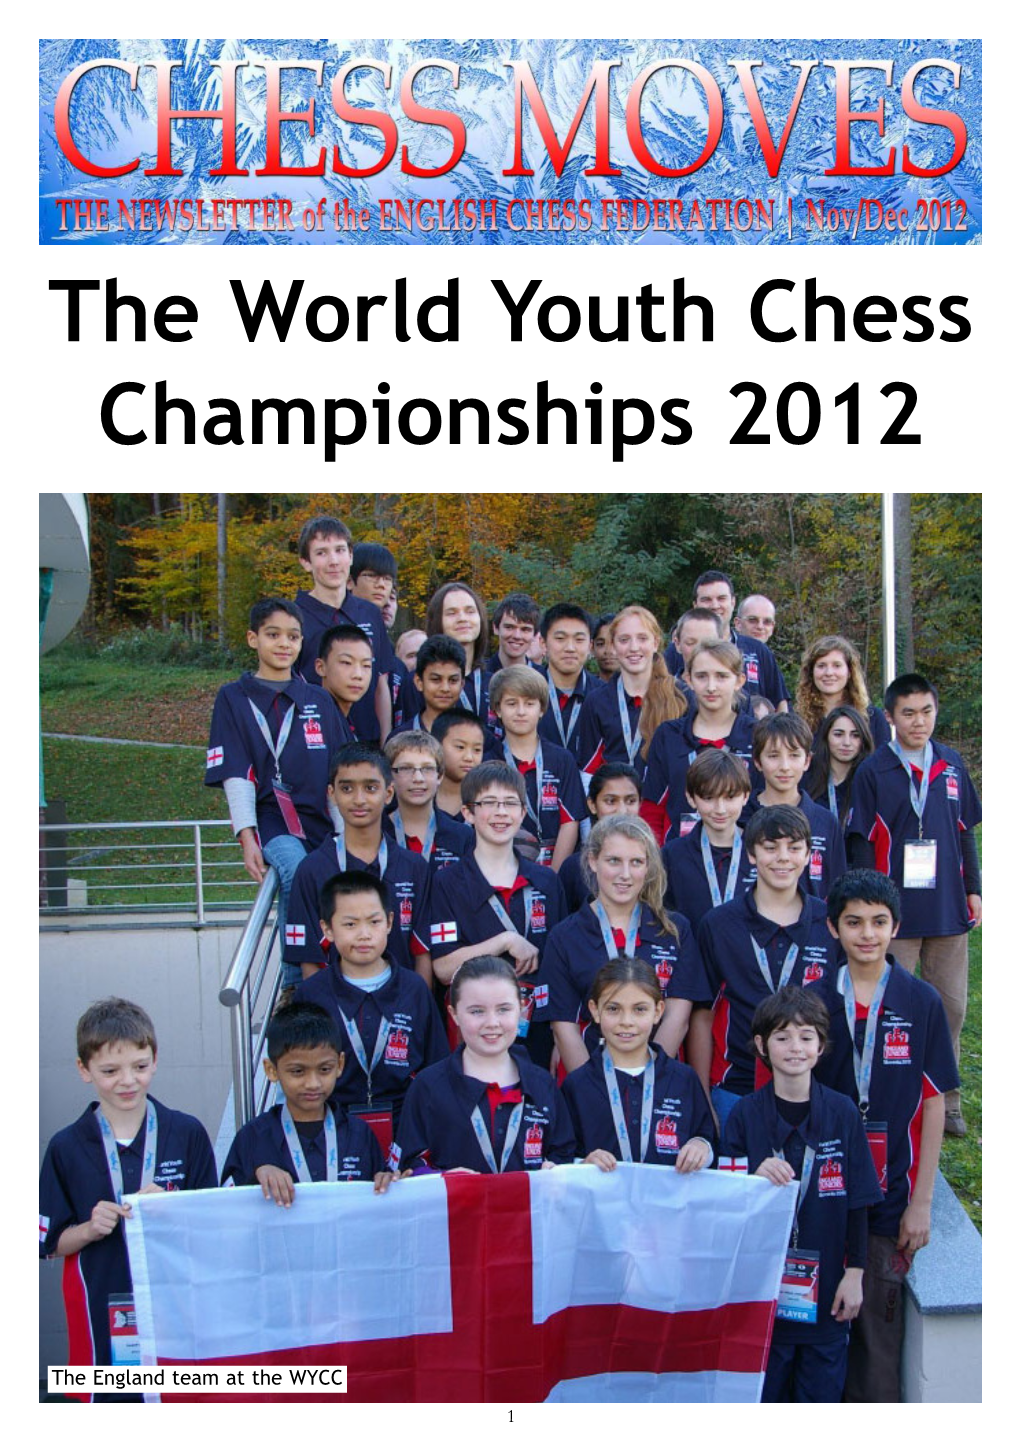 The World Youth Chess Championships 2012